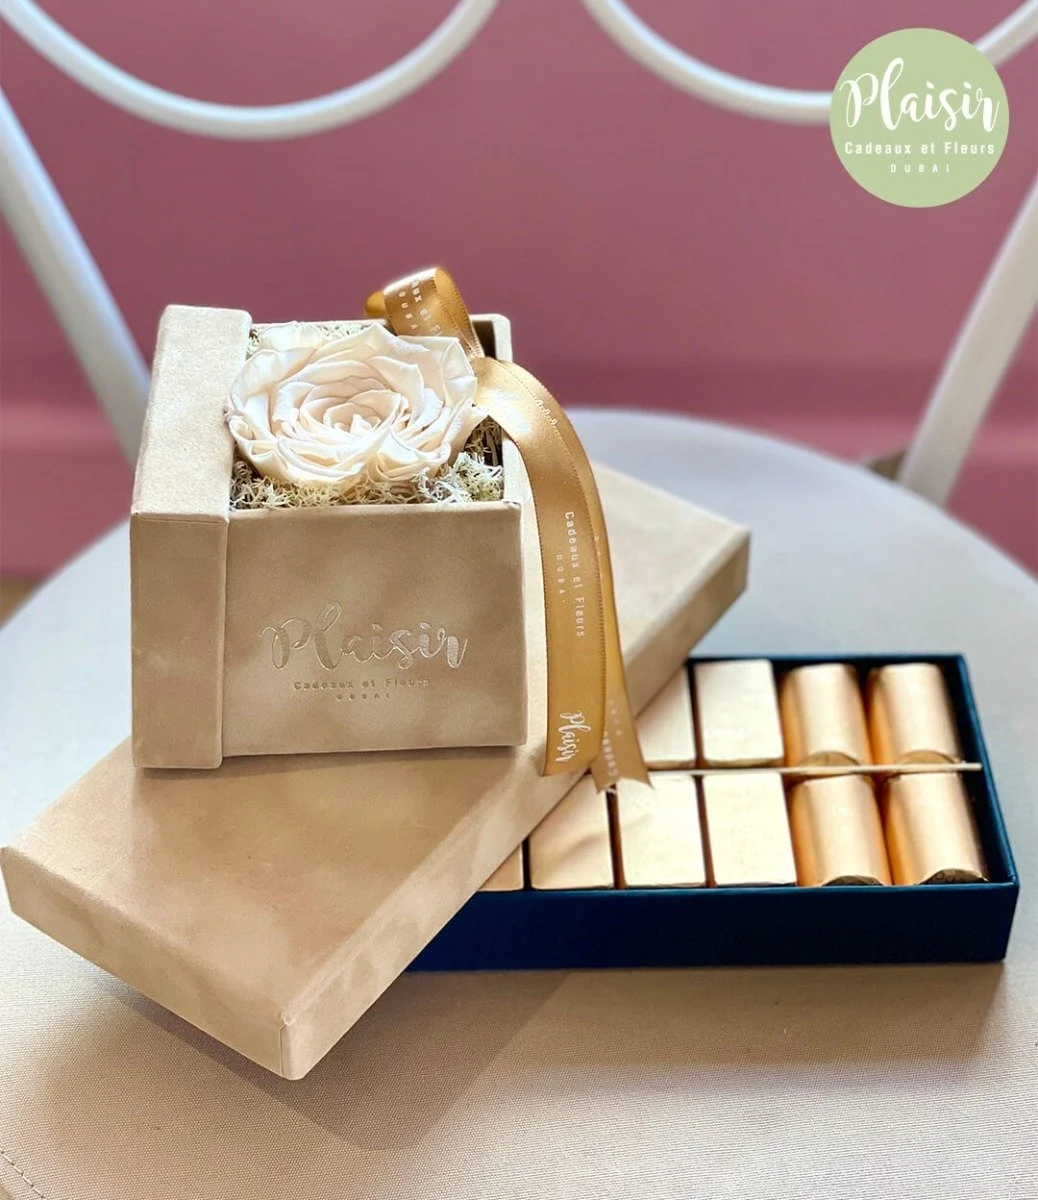 Single Infinity Rose and Patchi Chocolate Giftset in Tan by Plaisir